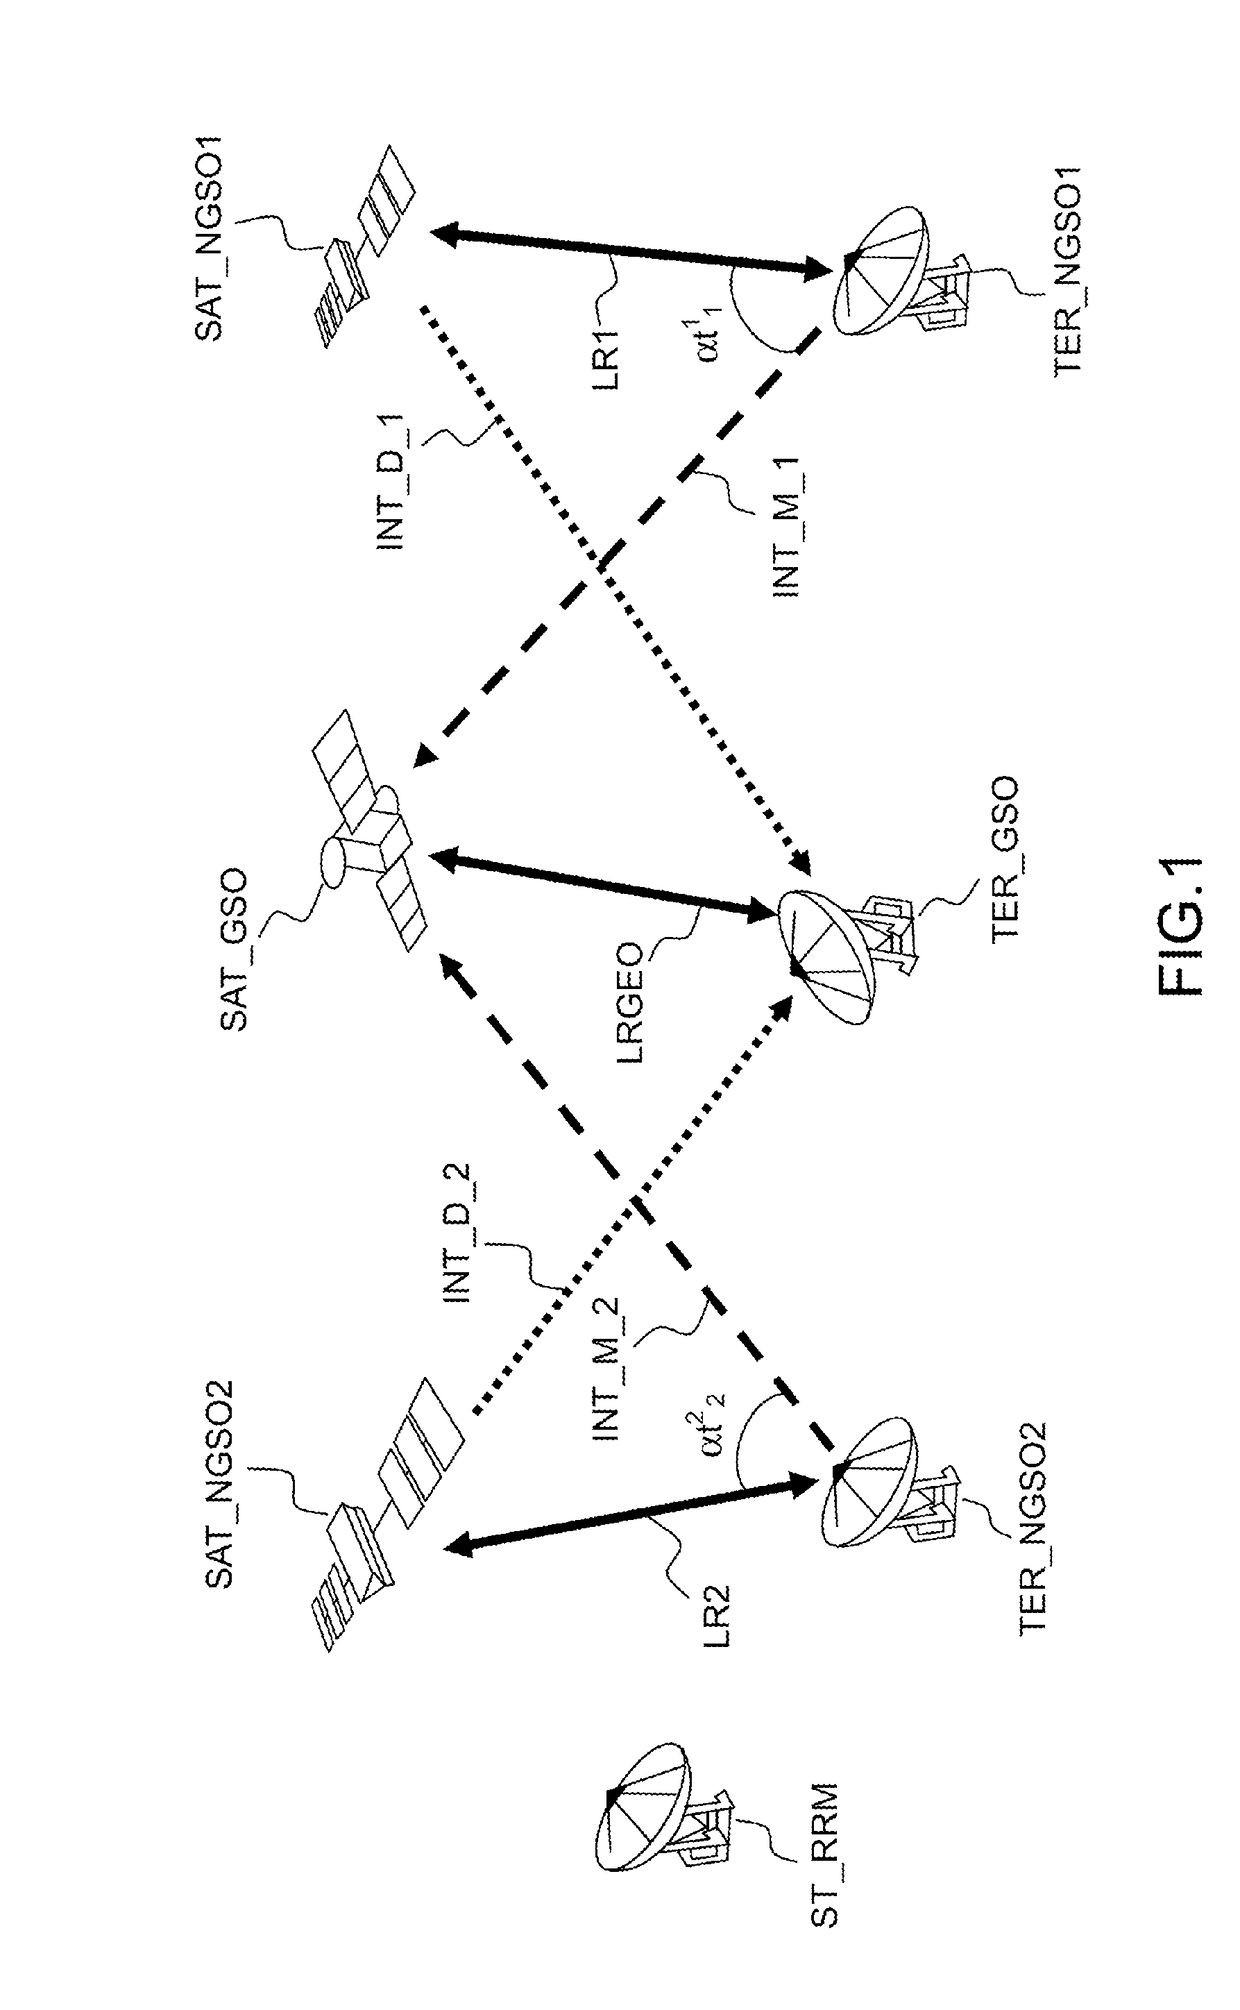 Method for allocating radio resources in a communication system using non-gso satellites with interference level constraint to a geostationary system